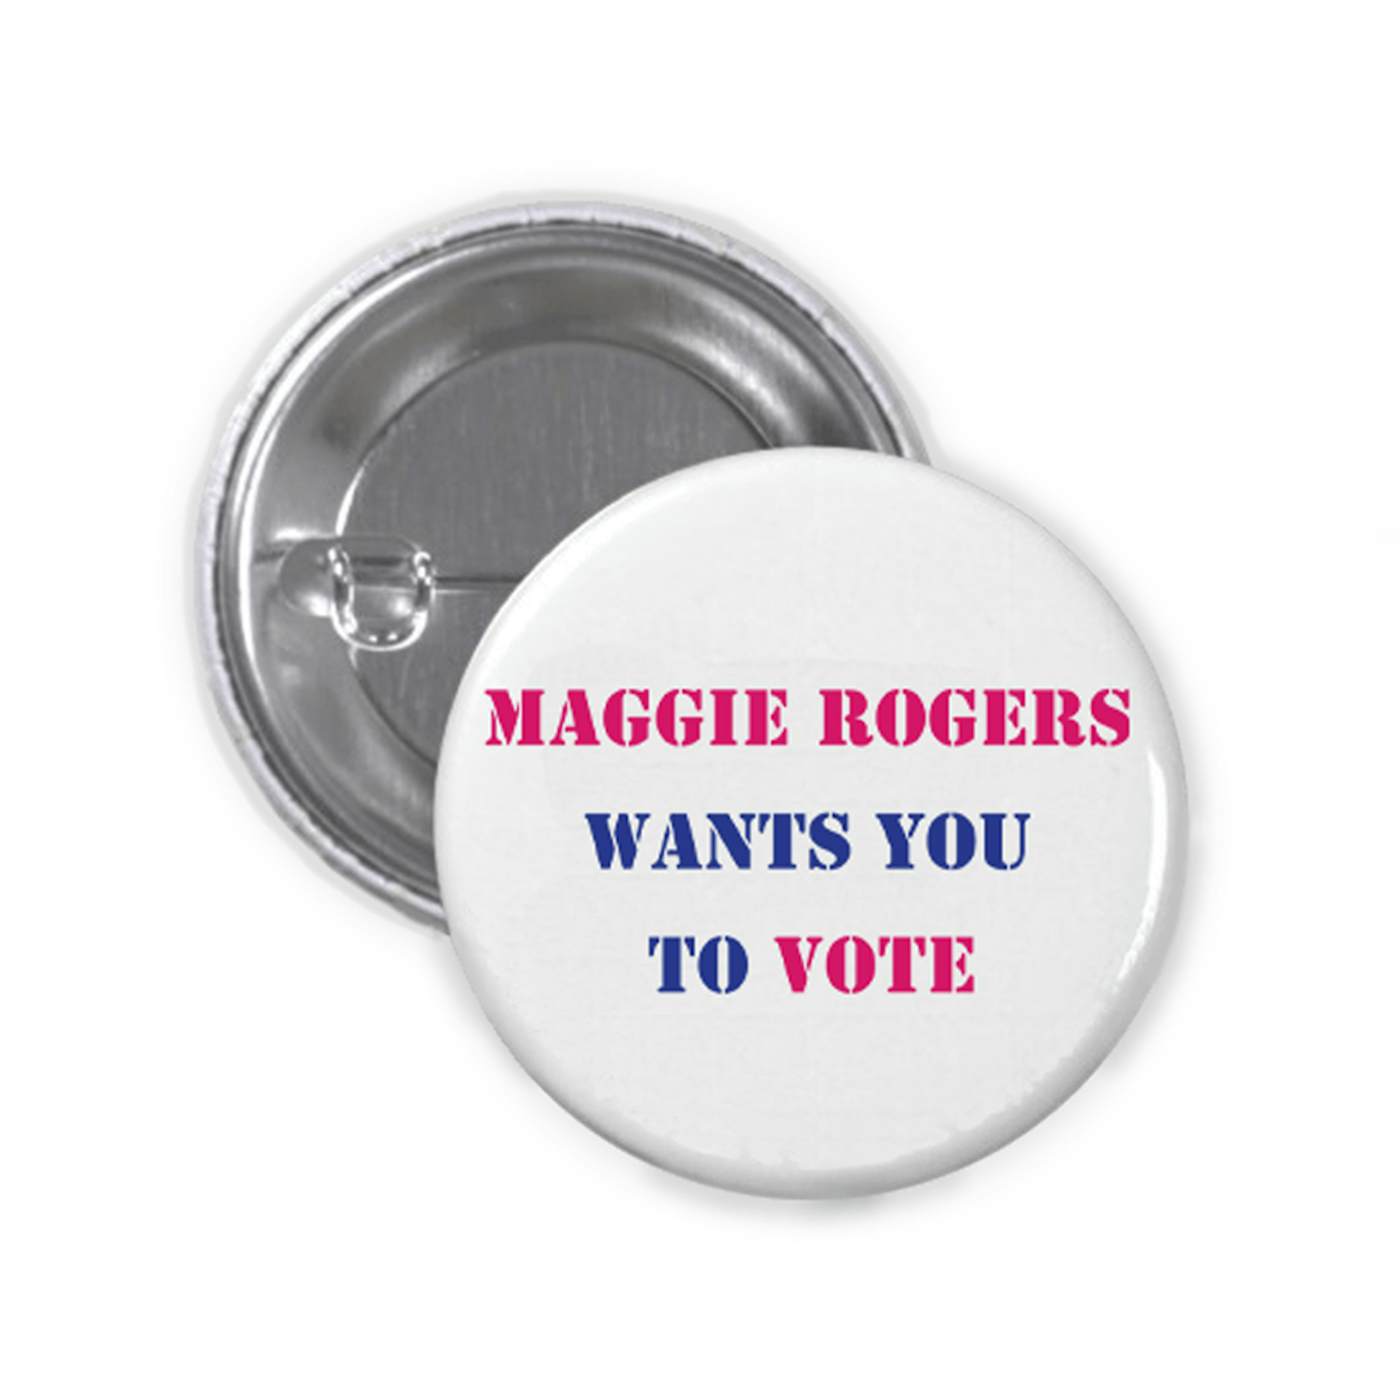 Maggie Rogers Wants You To Vote Button